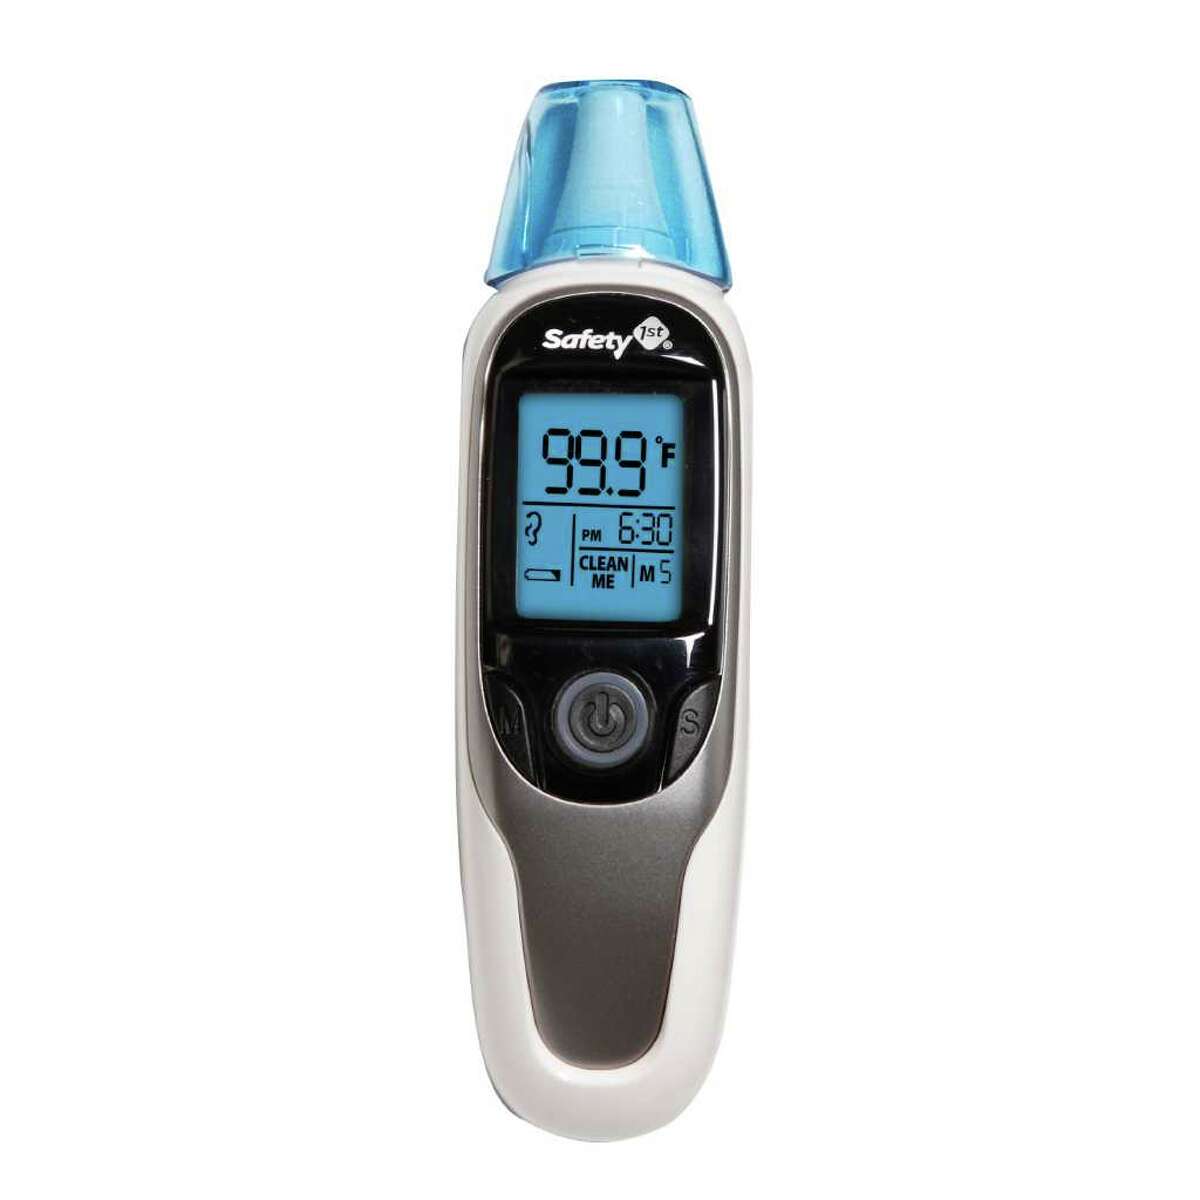 Tried and tested: Thermometers better seen, not heard